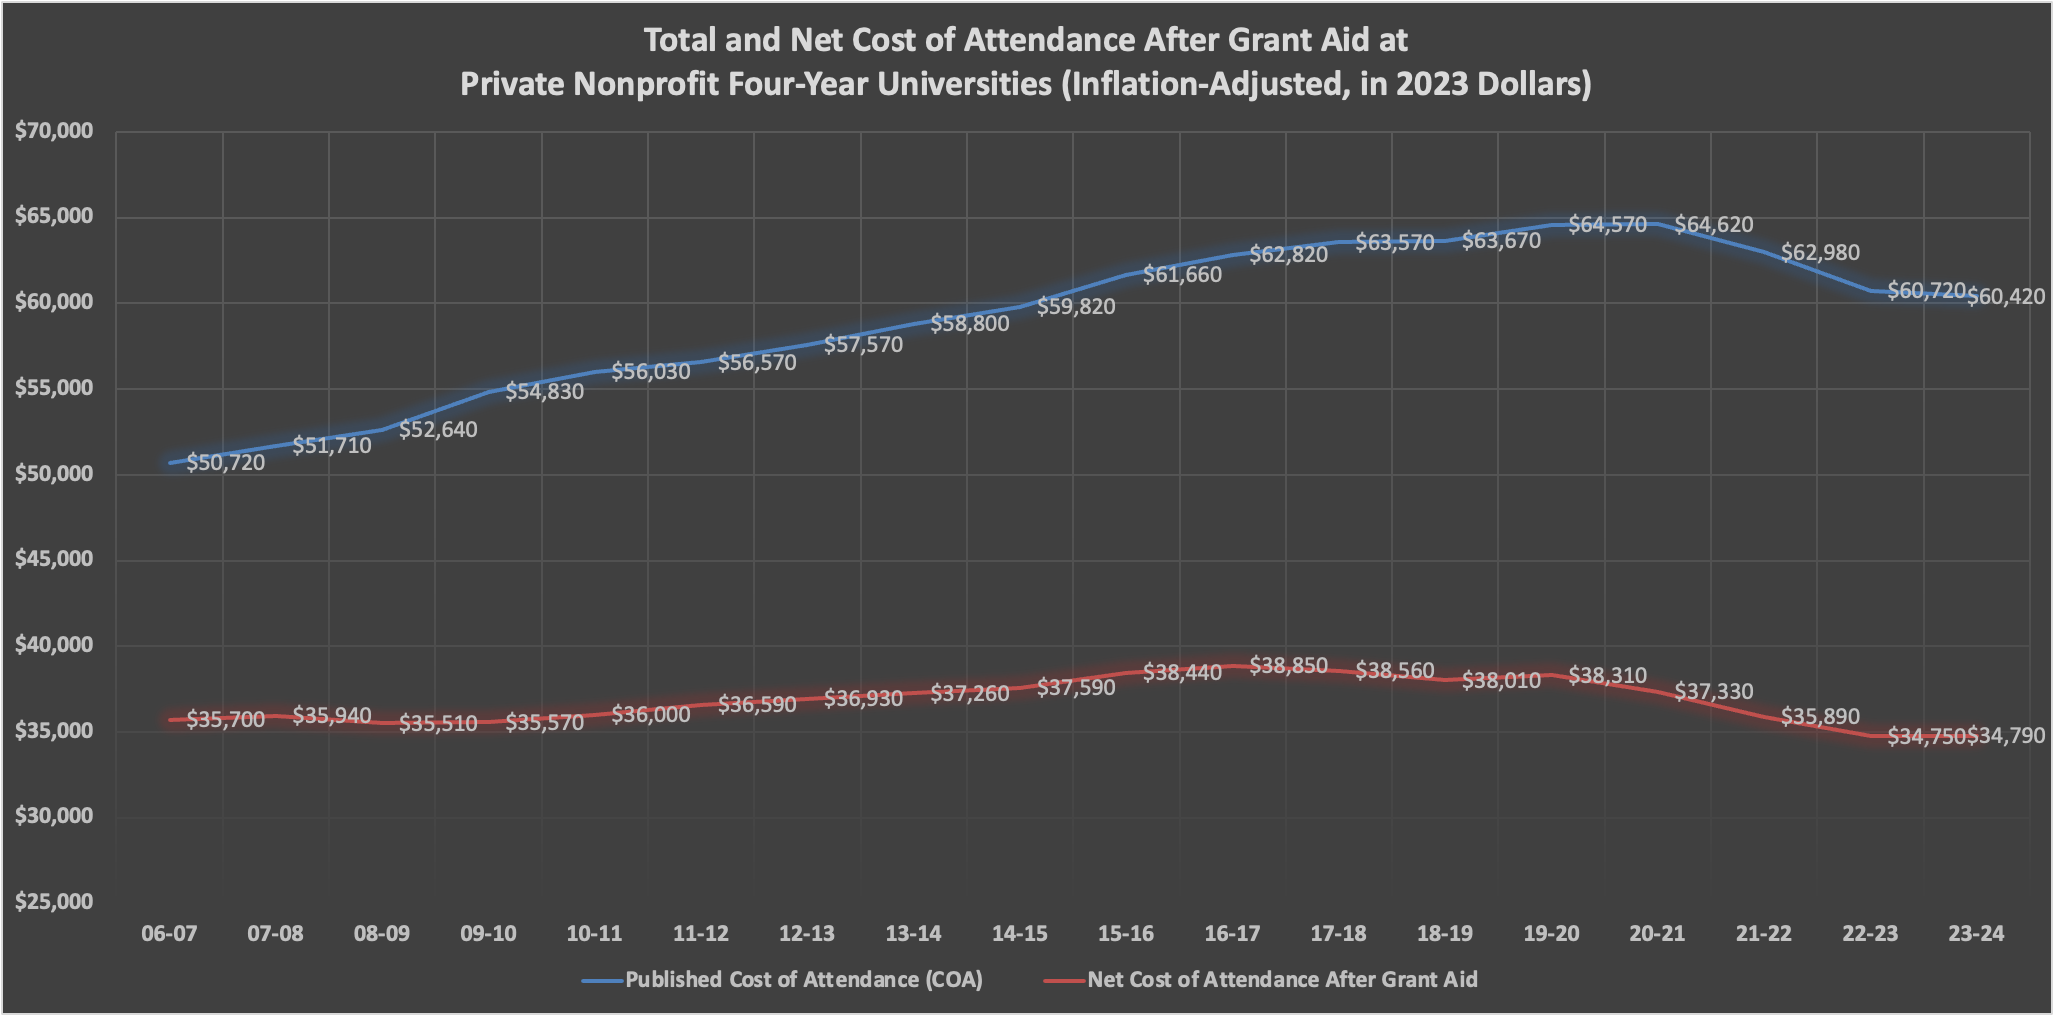 Total and Net Cost of Attendance After Grant Aid at Private Nonprofit Four-Year Universities (Inflation-Adjusted, in 2023 Dollars)
